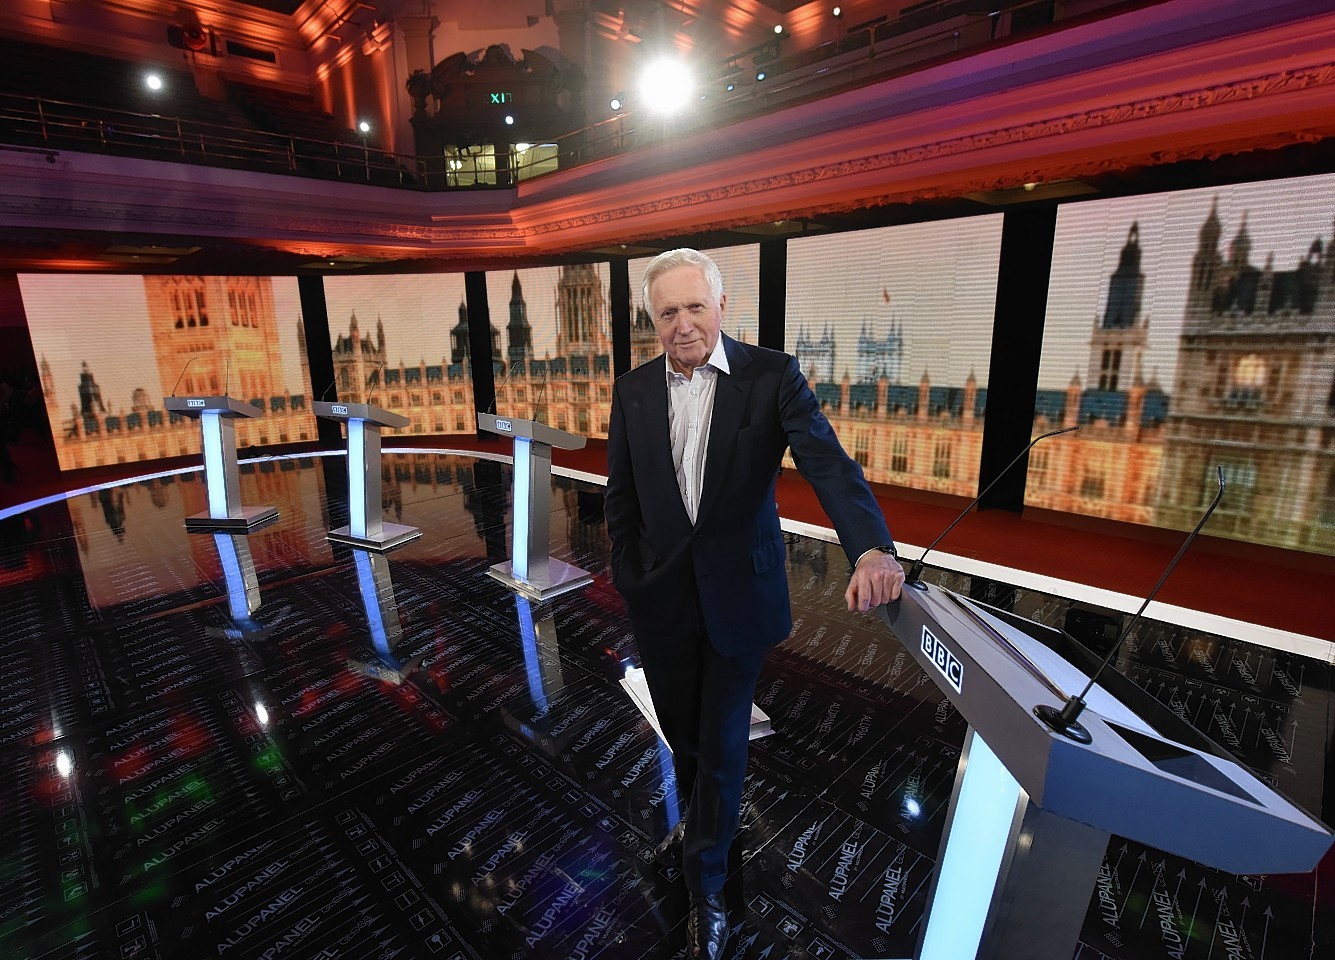 Presenter David Dimbleby gets ready to host this evening's debate